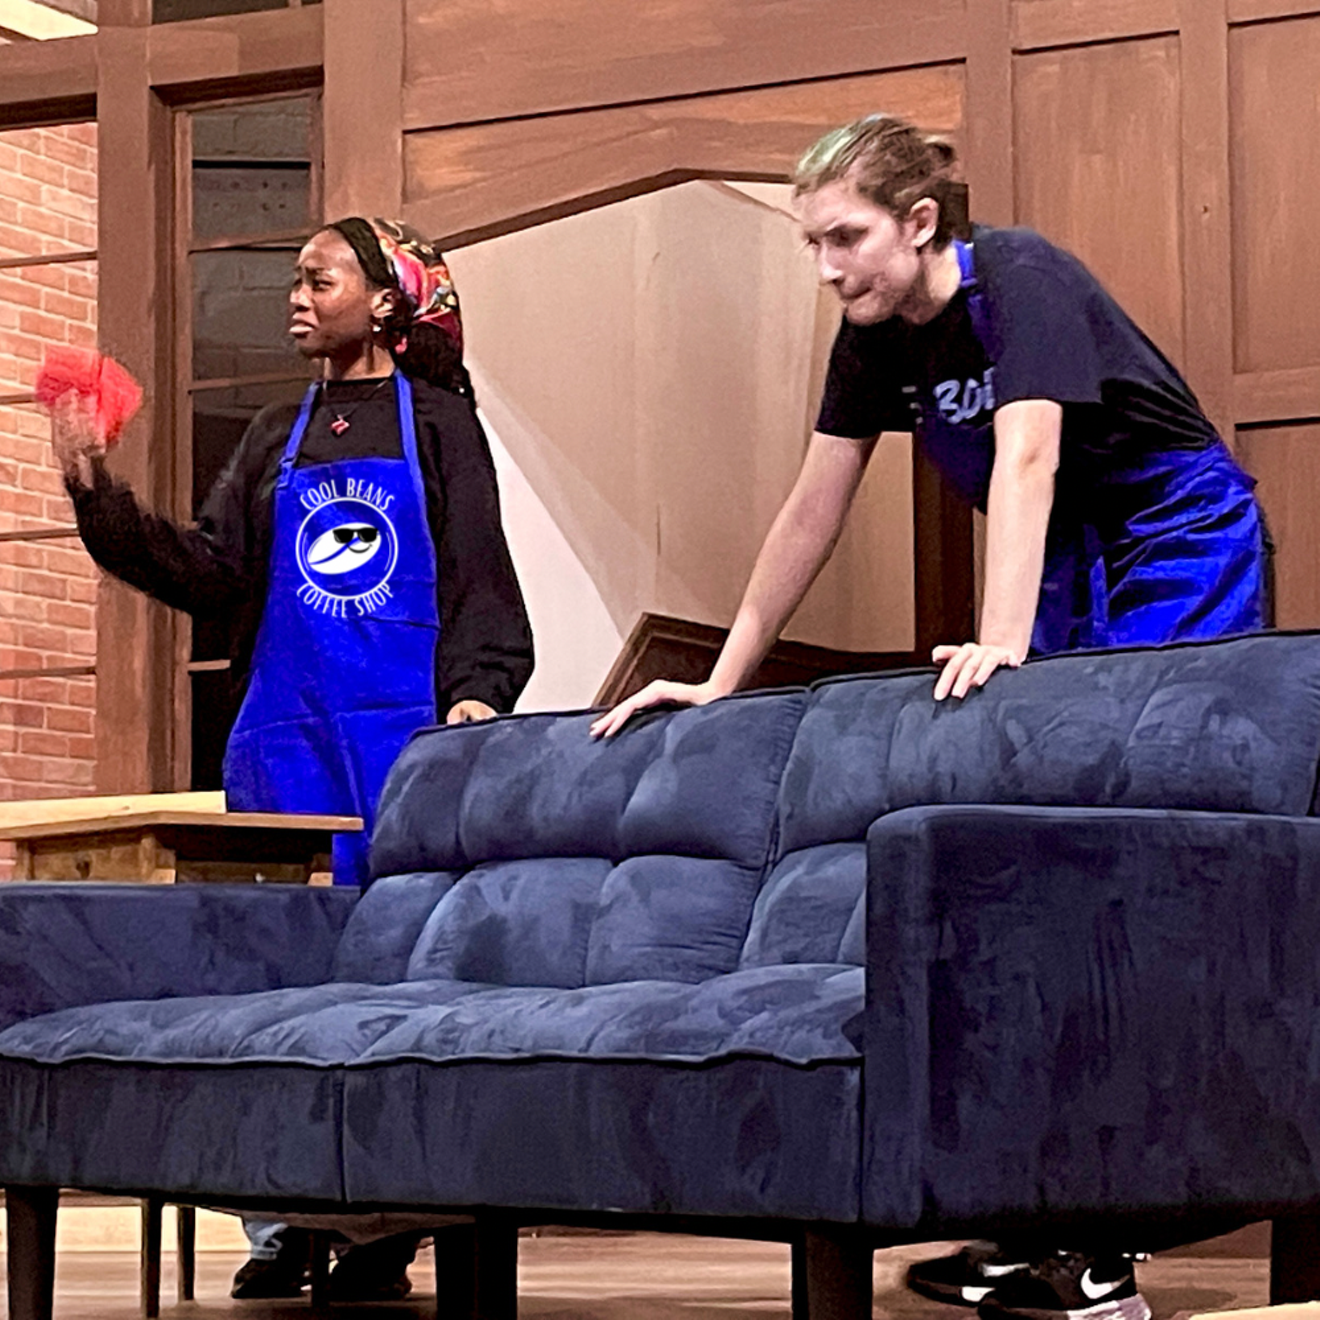 Edith Ibeke and Paola Hoffman in The Rice Players’ production of That Thing in The Bathroom.